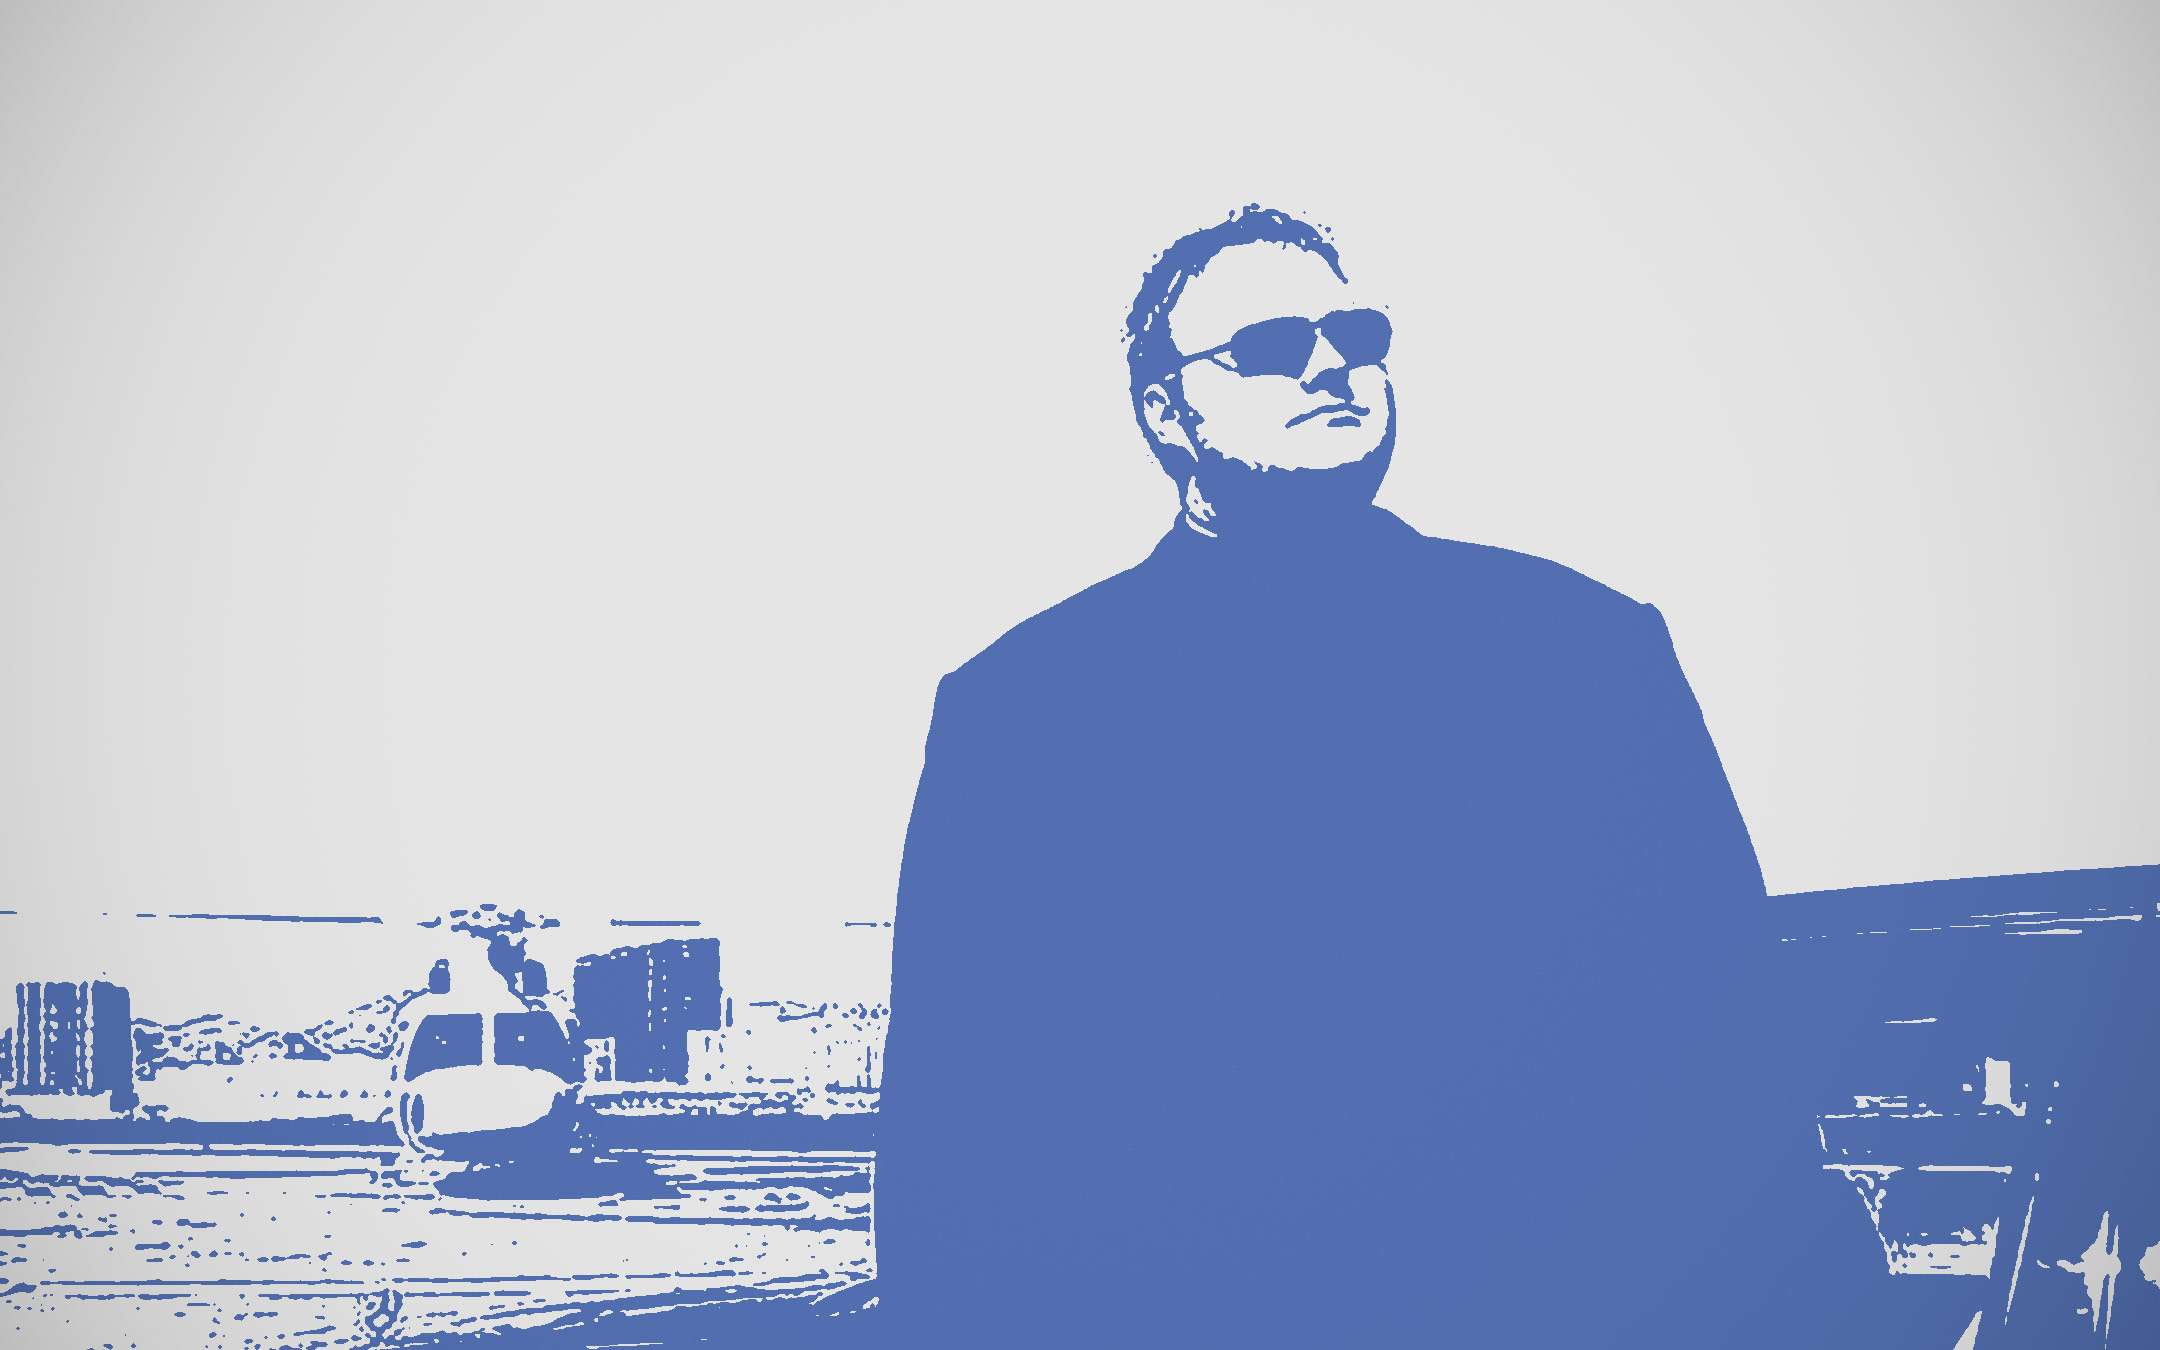 Kim Dotcom faces extradition to the US